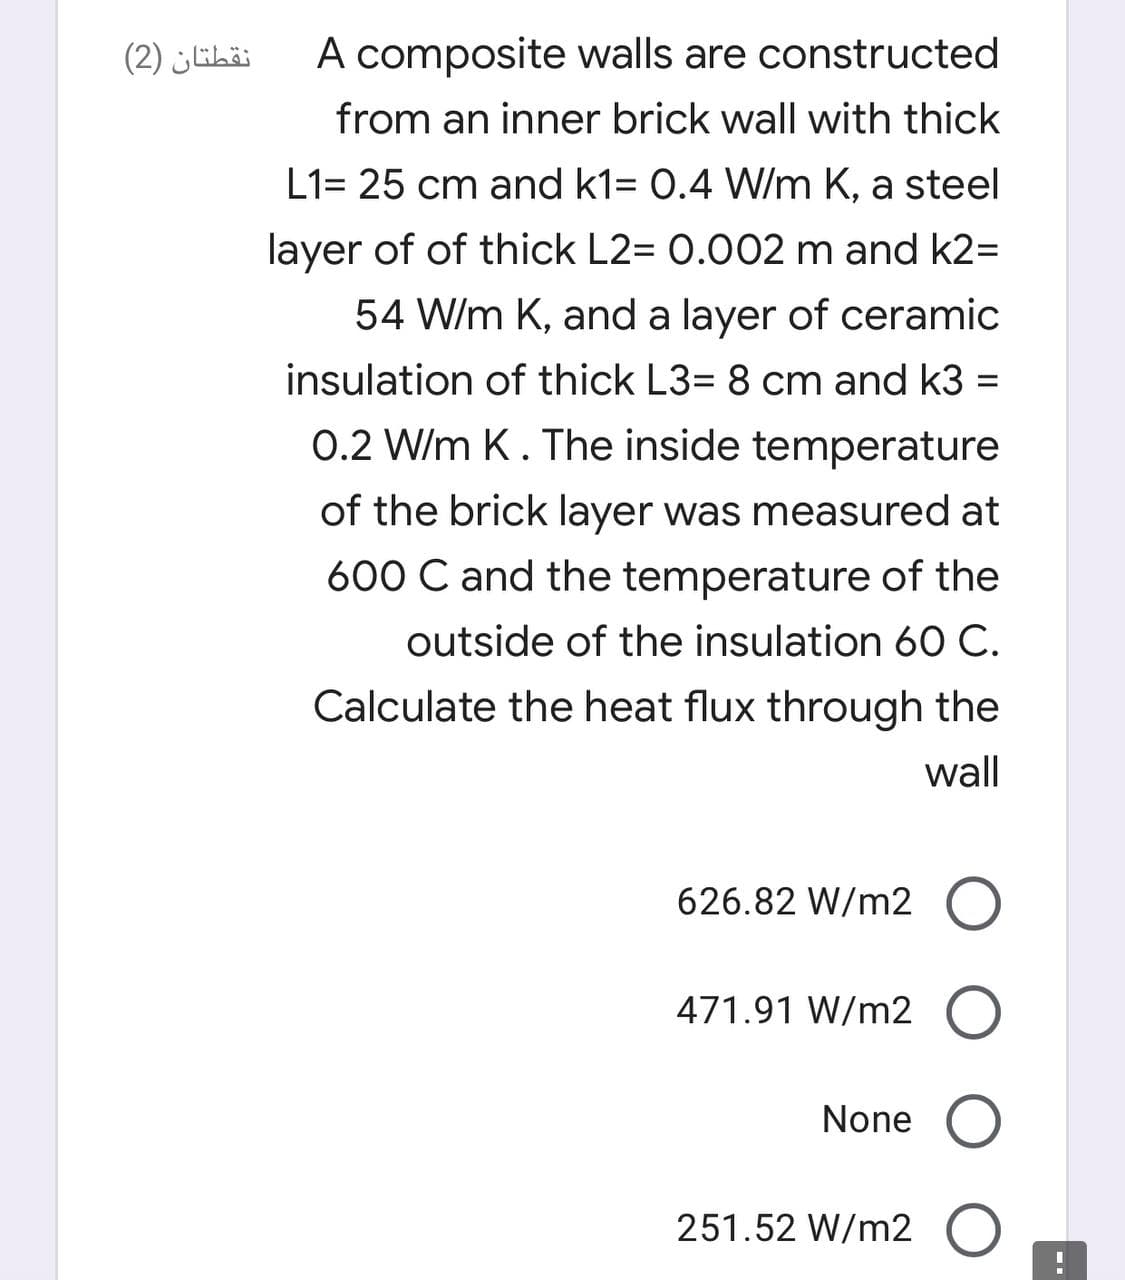 نقطتان )2(
A composite walls are constructed
from an inner brick wall with thick
L1= 25 cm and k1= 0.4 W/m K, a steel
layer of of thick L2= 0.002 m and k2=
54 W/m K, and a layer of ceramic
insulation of thick L3= 8 cm and k3 =
0.2 W/m K. The inside temperature
of the brick layer was measured at
600 C and the temperature of the
outside of the insulation 60 C.
Calculate the heat flux through the
wall
626.82 W/m2 O
471.91 W/m2 O
None
251.52 W/m2 O
